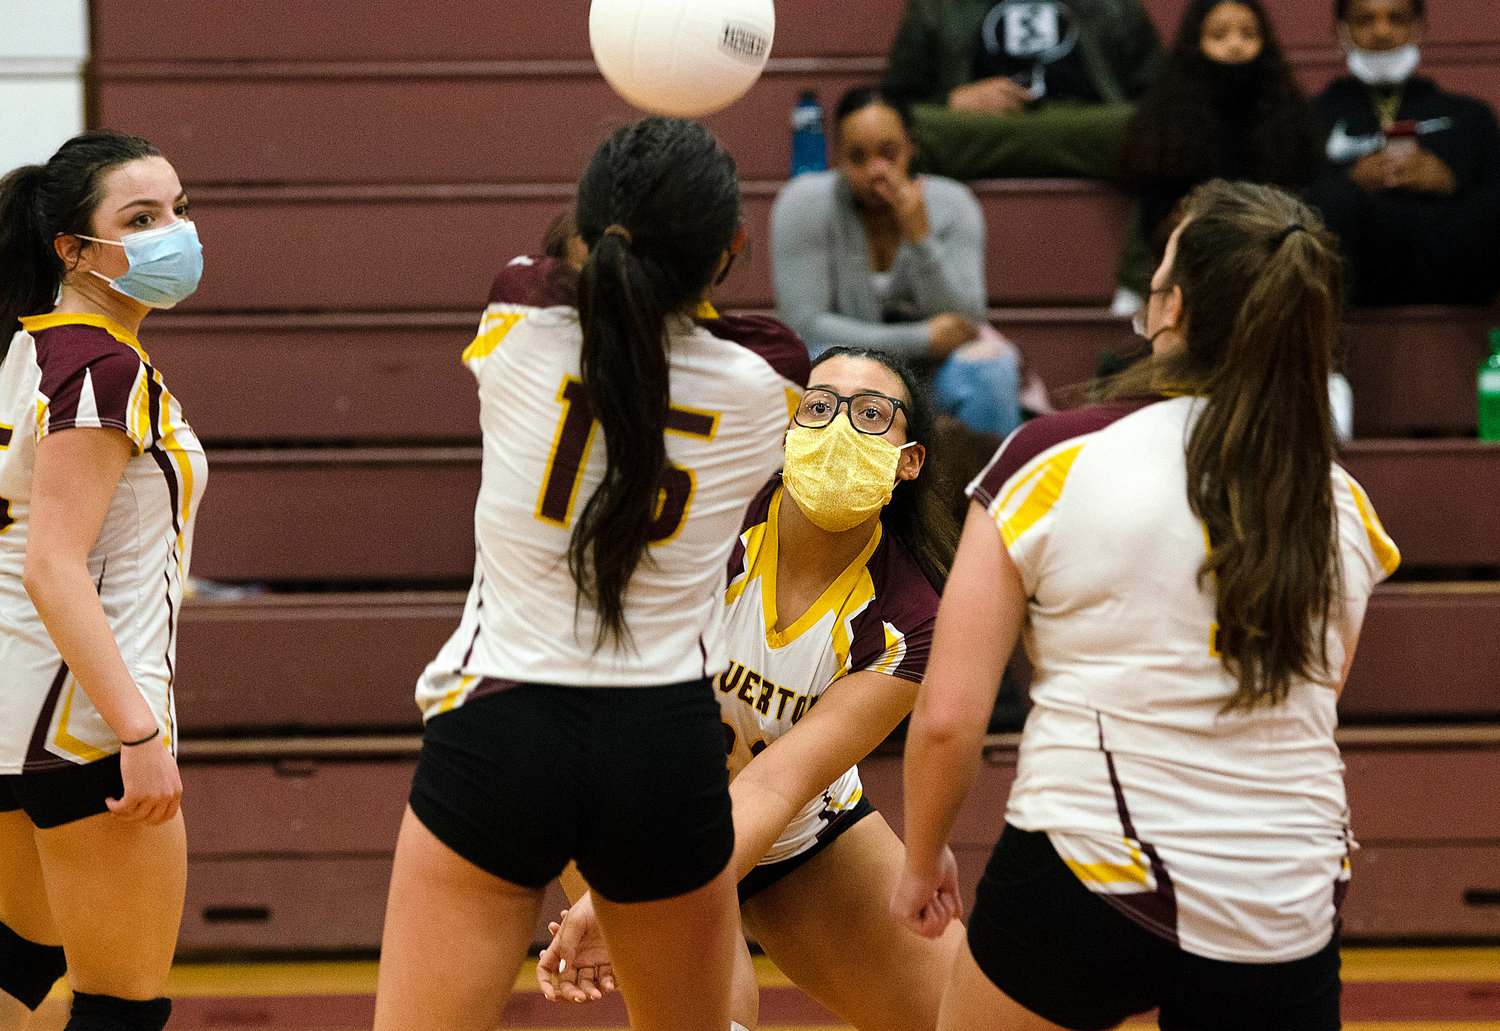 Teammates look on as Kaylie Cabral (mid-left) and Olivia Miranda vie for the ball.